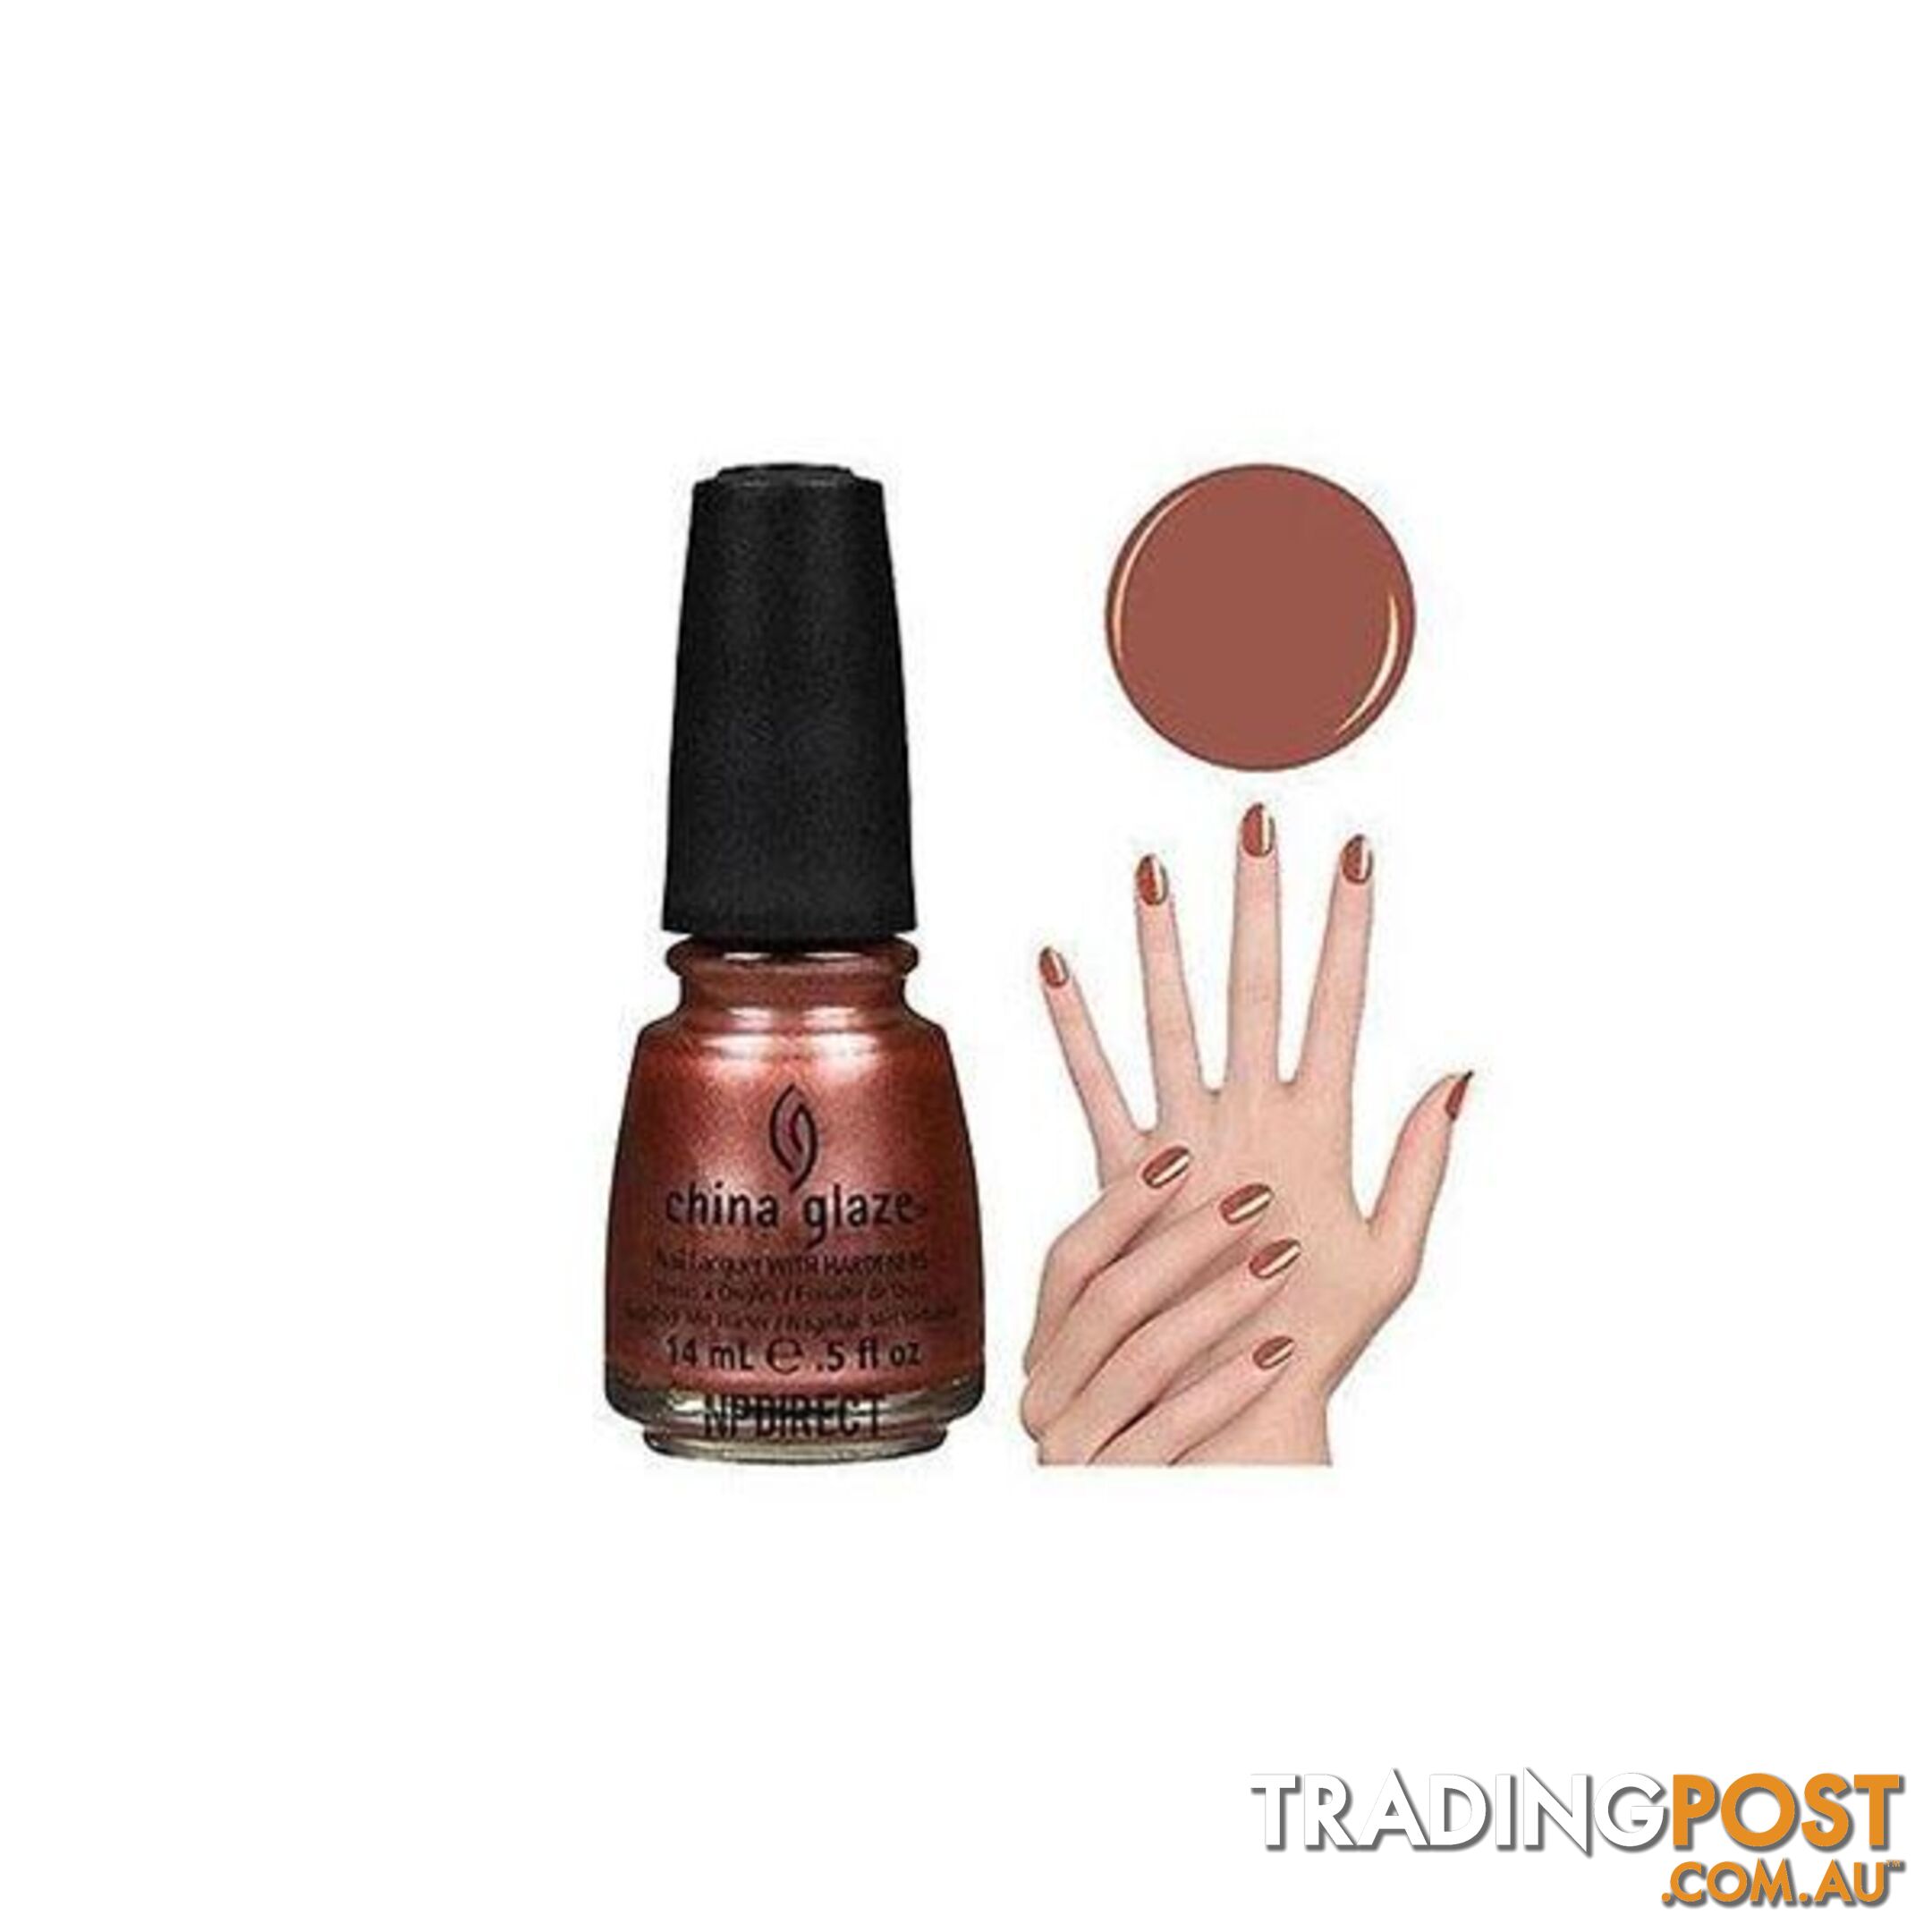 China Glaze Nail Lacquer - Unbranded - 4326500379726